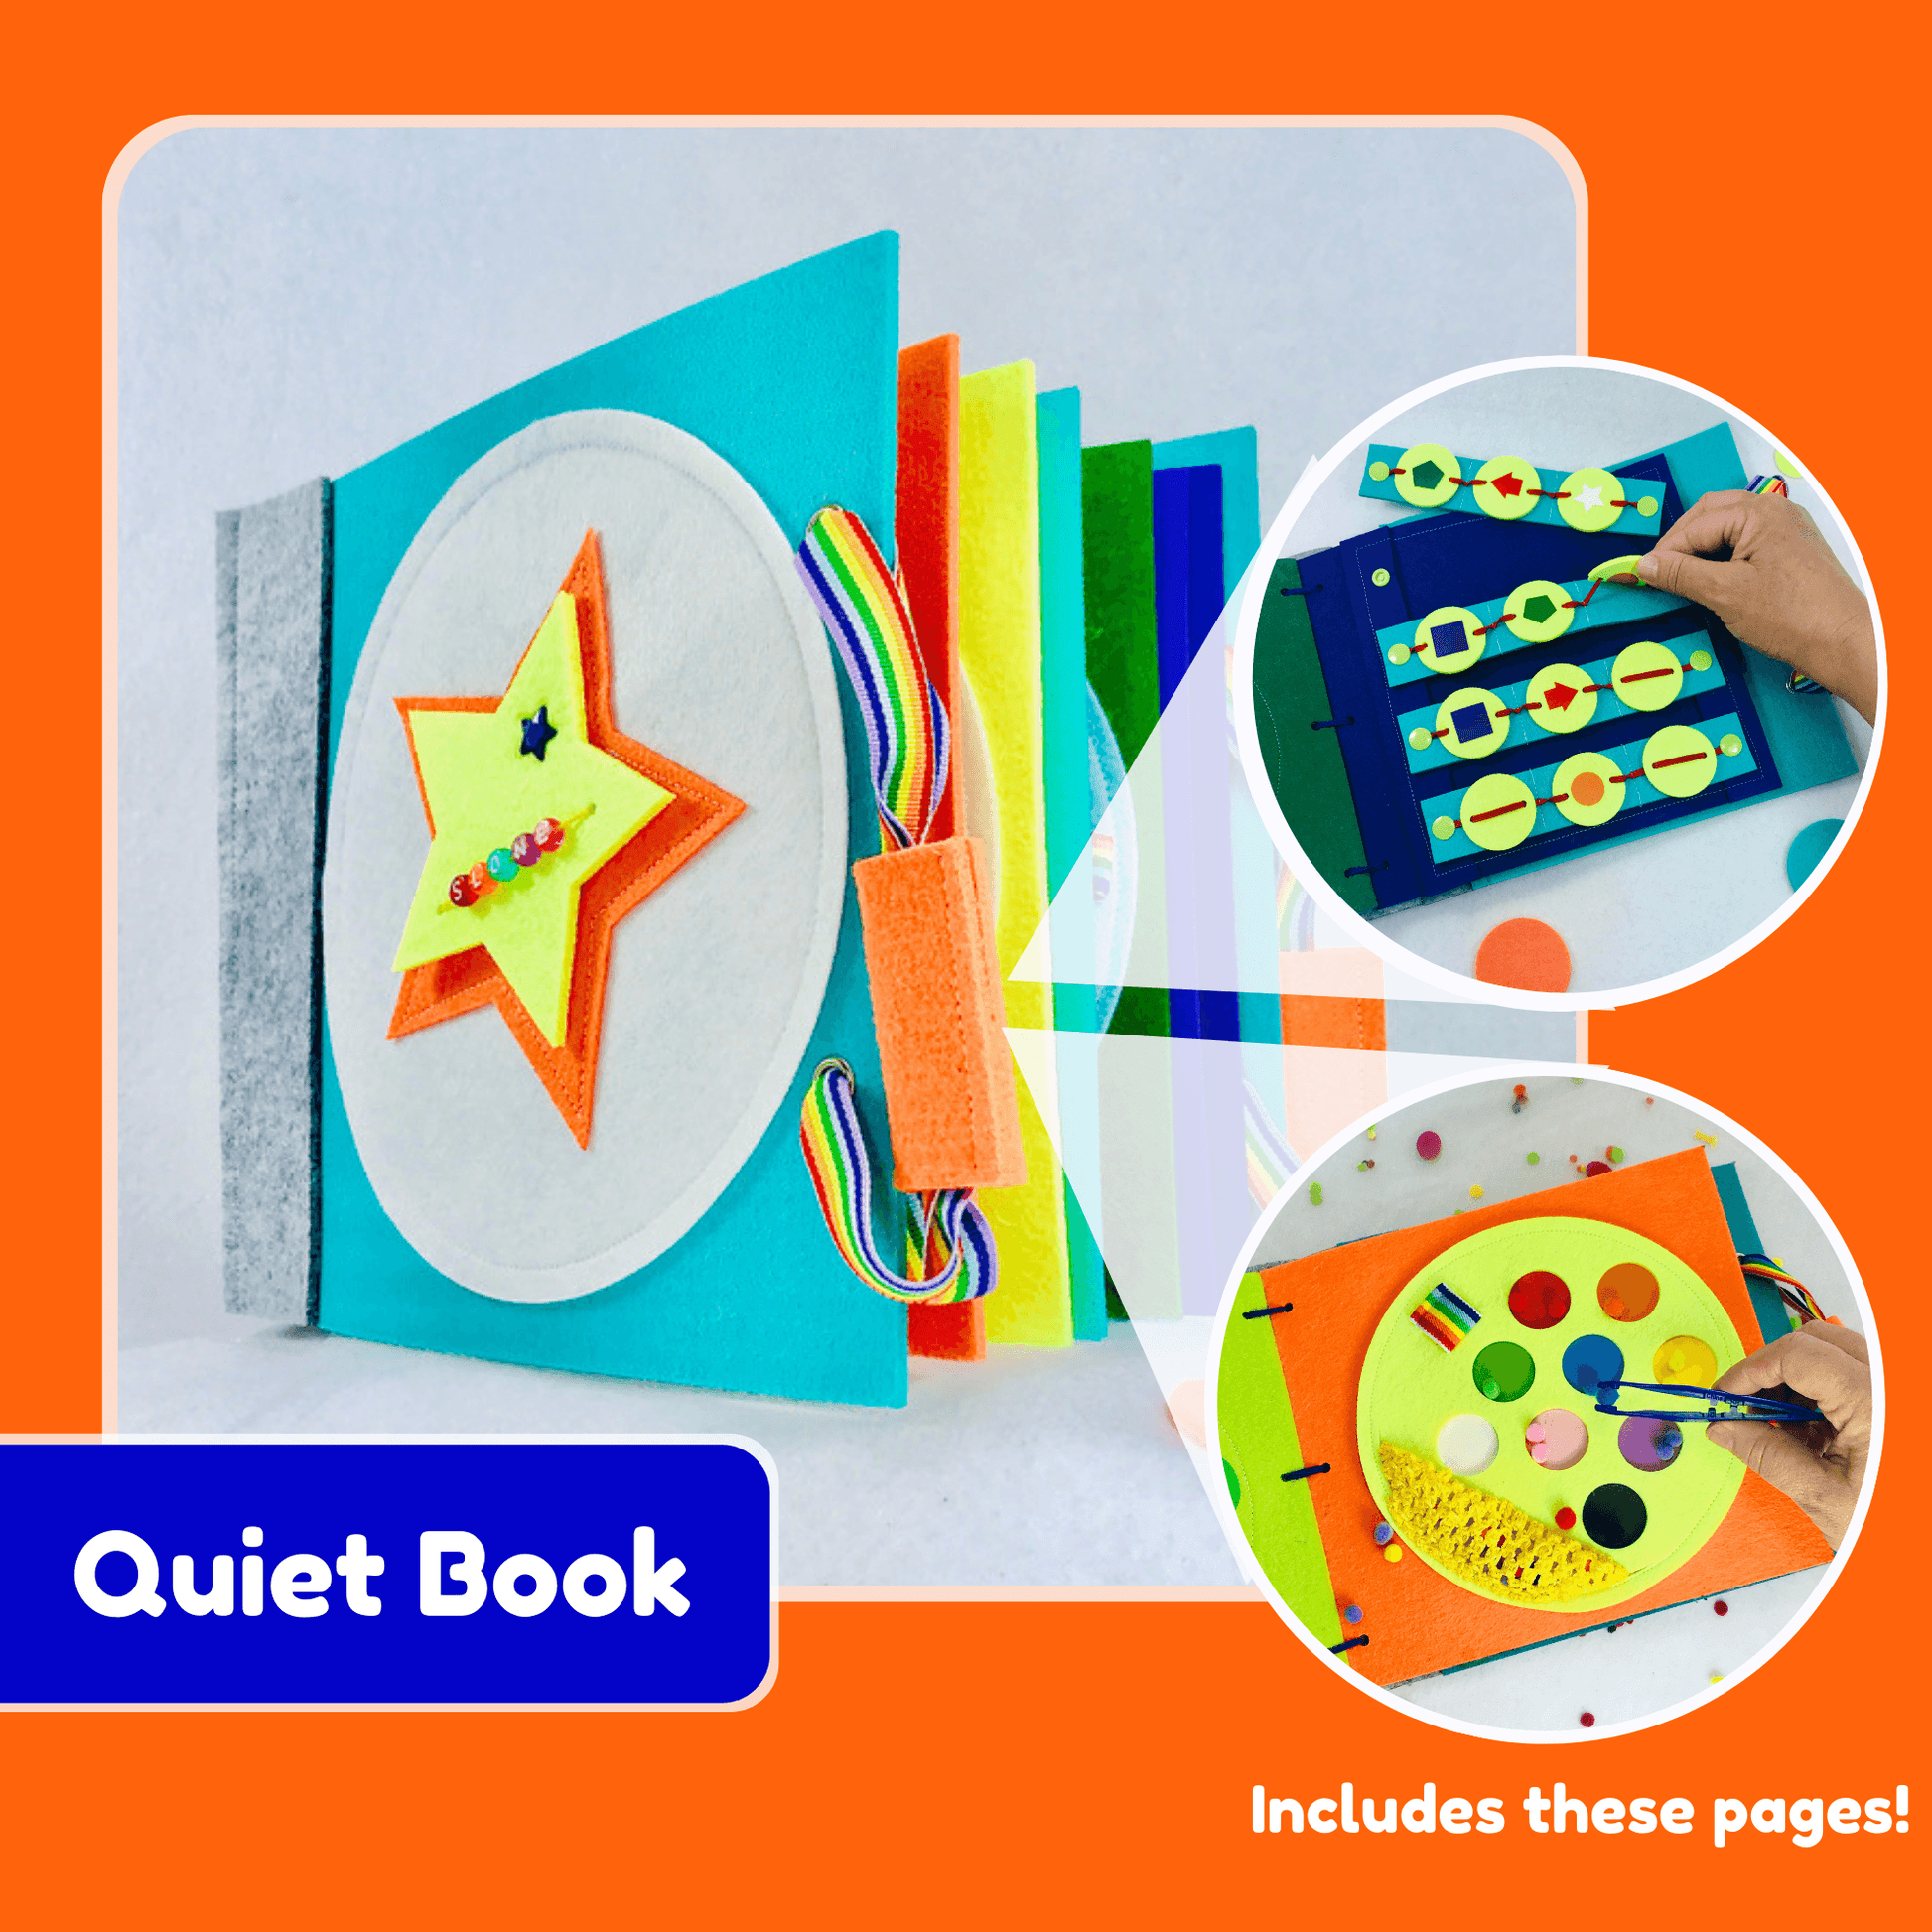 Memory Match Game Quiet Book Page - tinyfeats